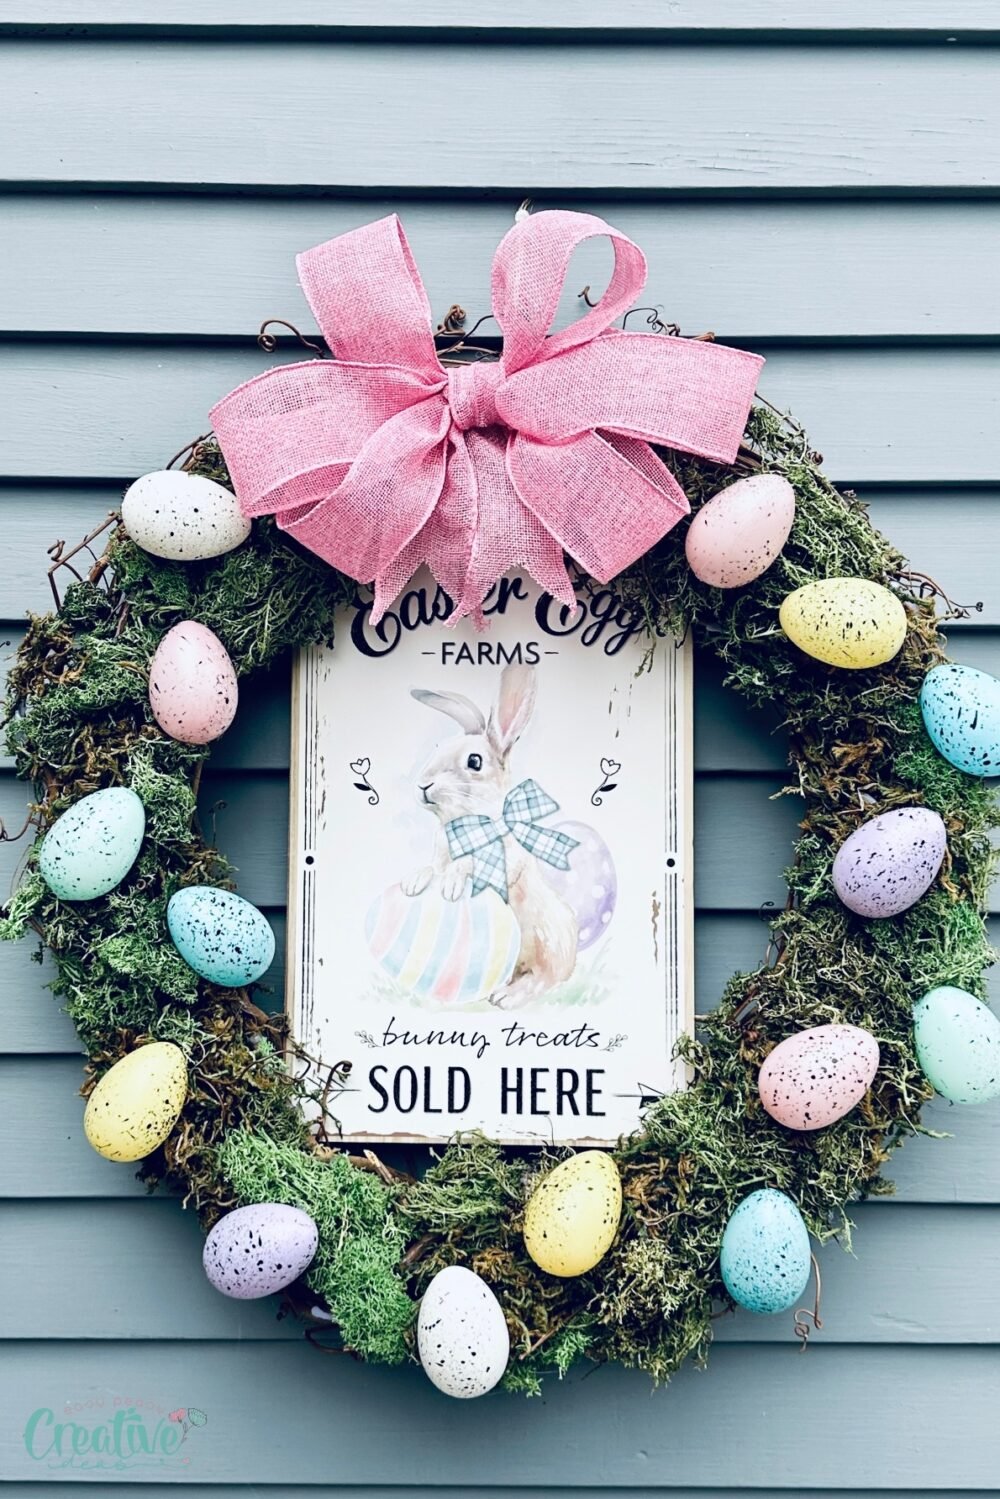 A cheerful Easter door wreath adorned with vibrant eggs and a sign, a lively touch to your home décor.